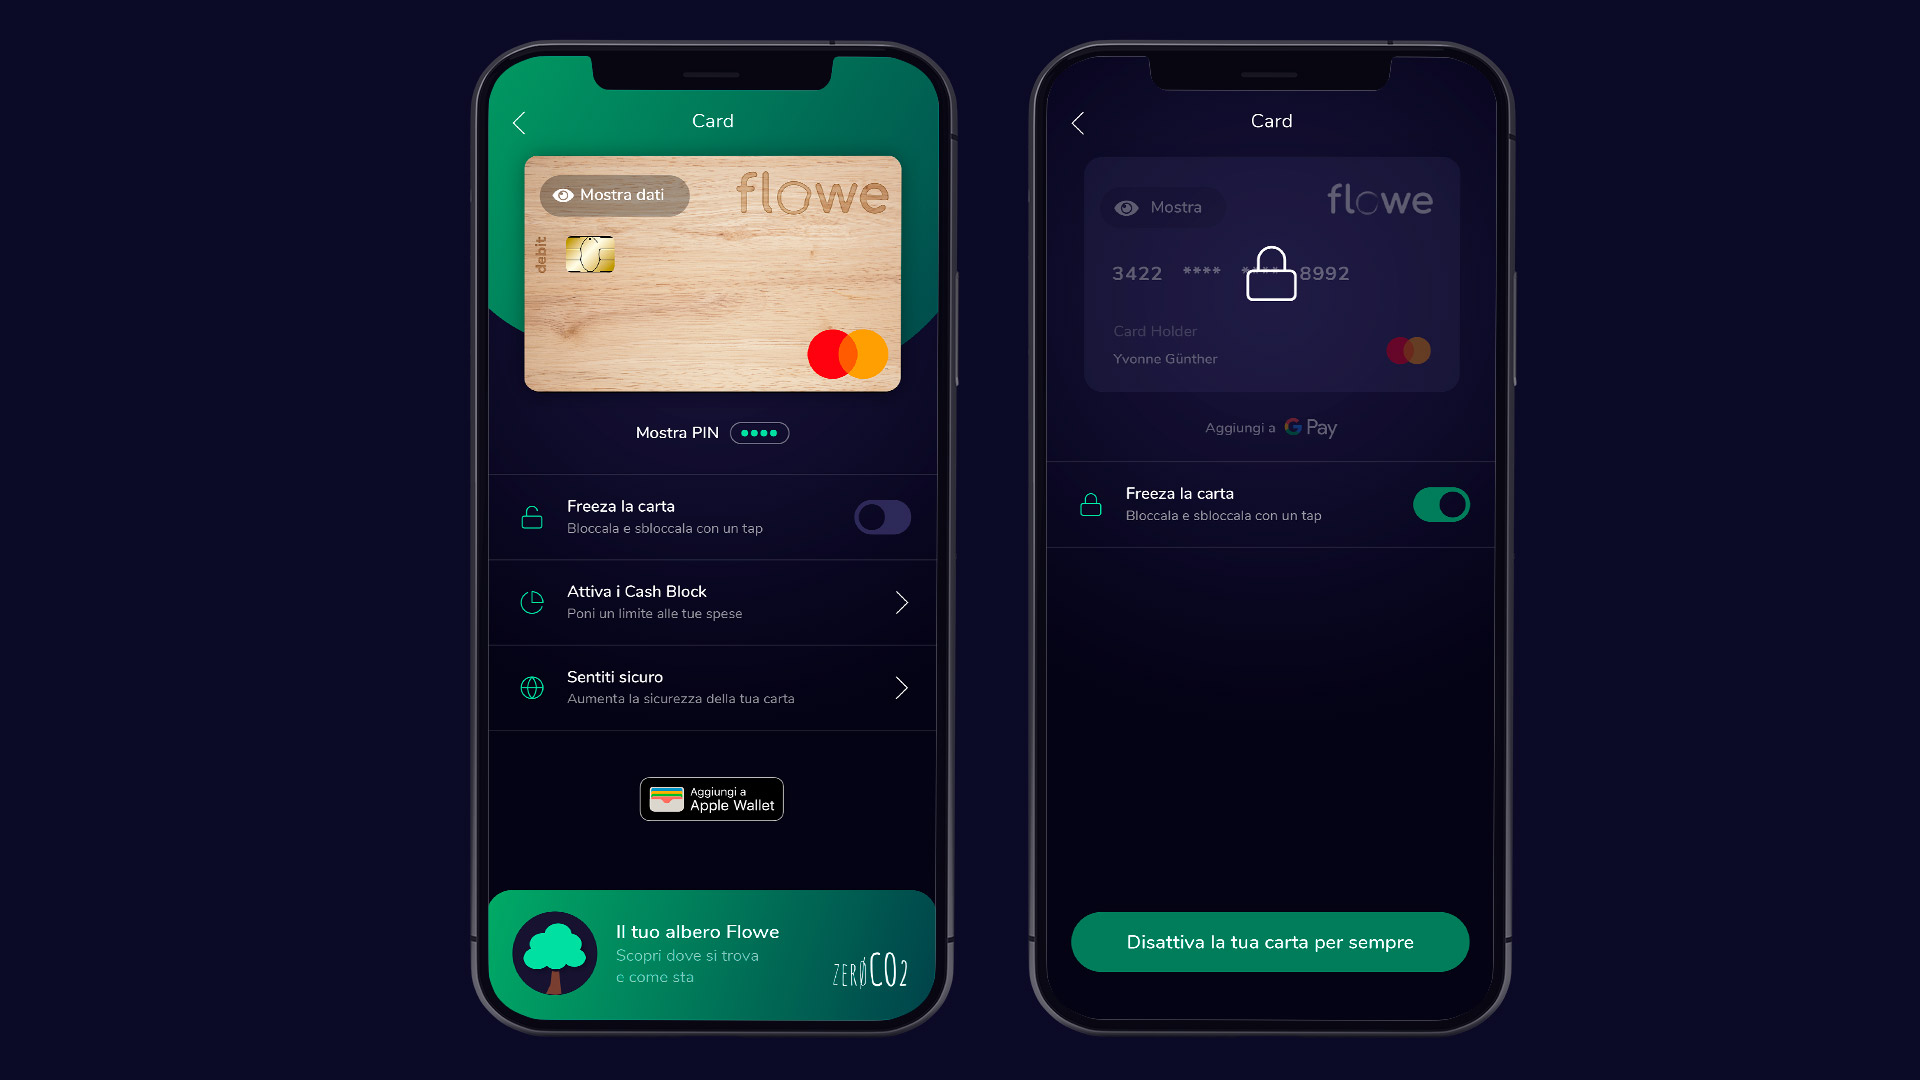 Flowe The Banking Service That Points To A Sustainable Future